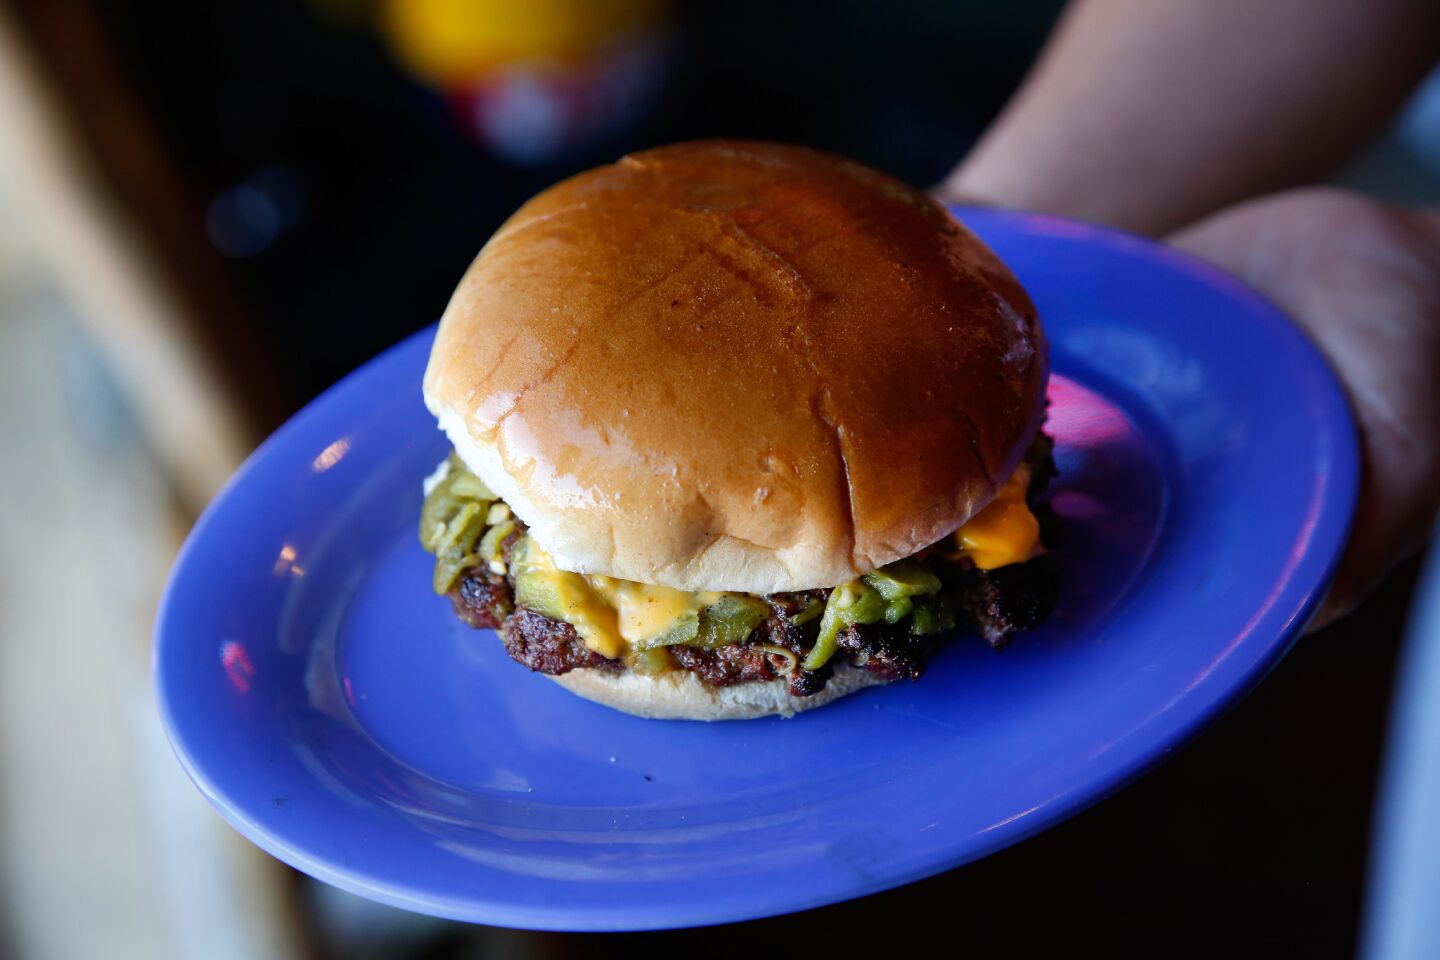 Green chile cheeseburger at Sparky's in Hatch, NM.